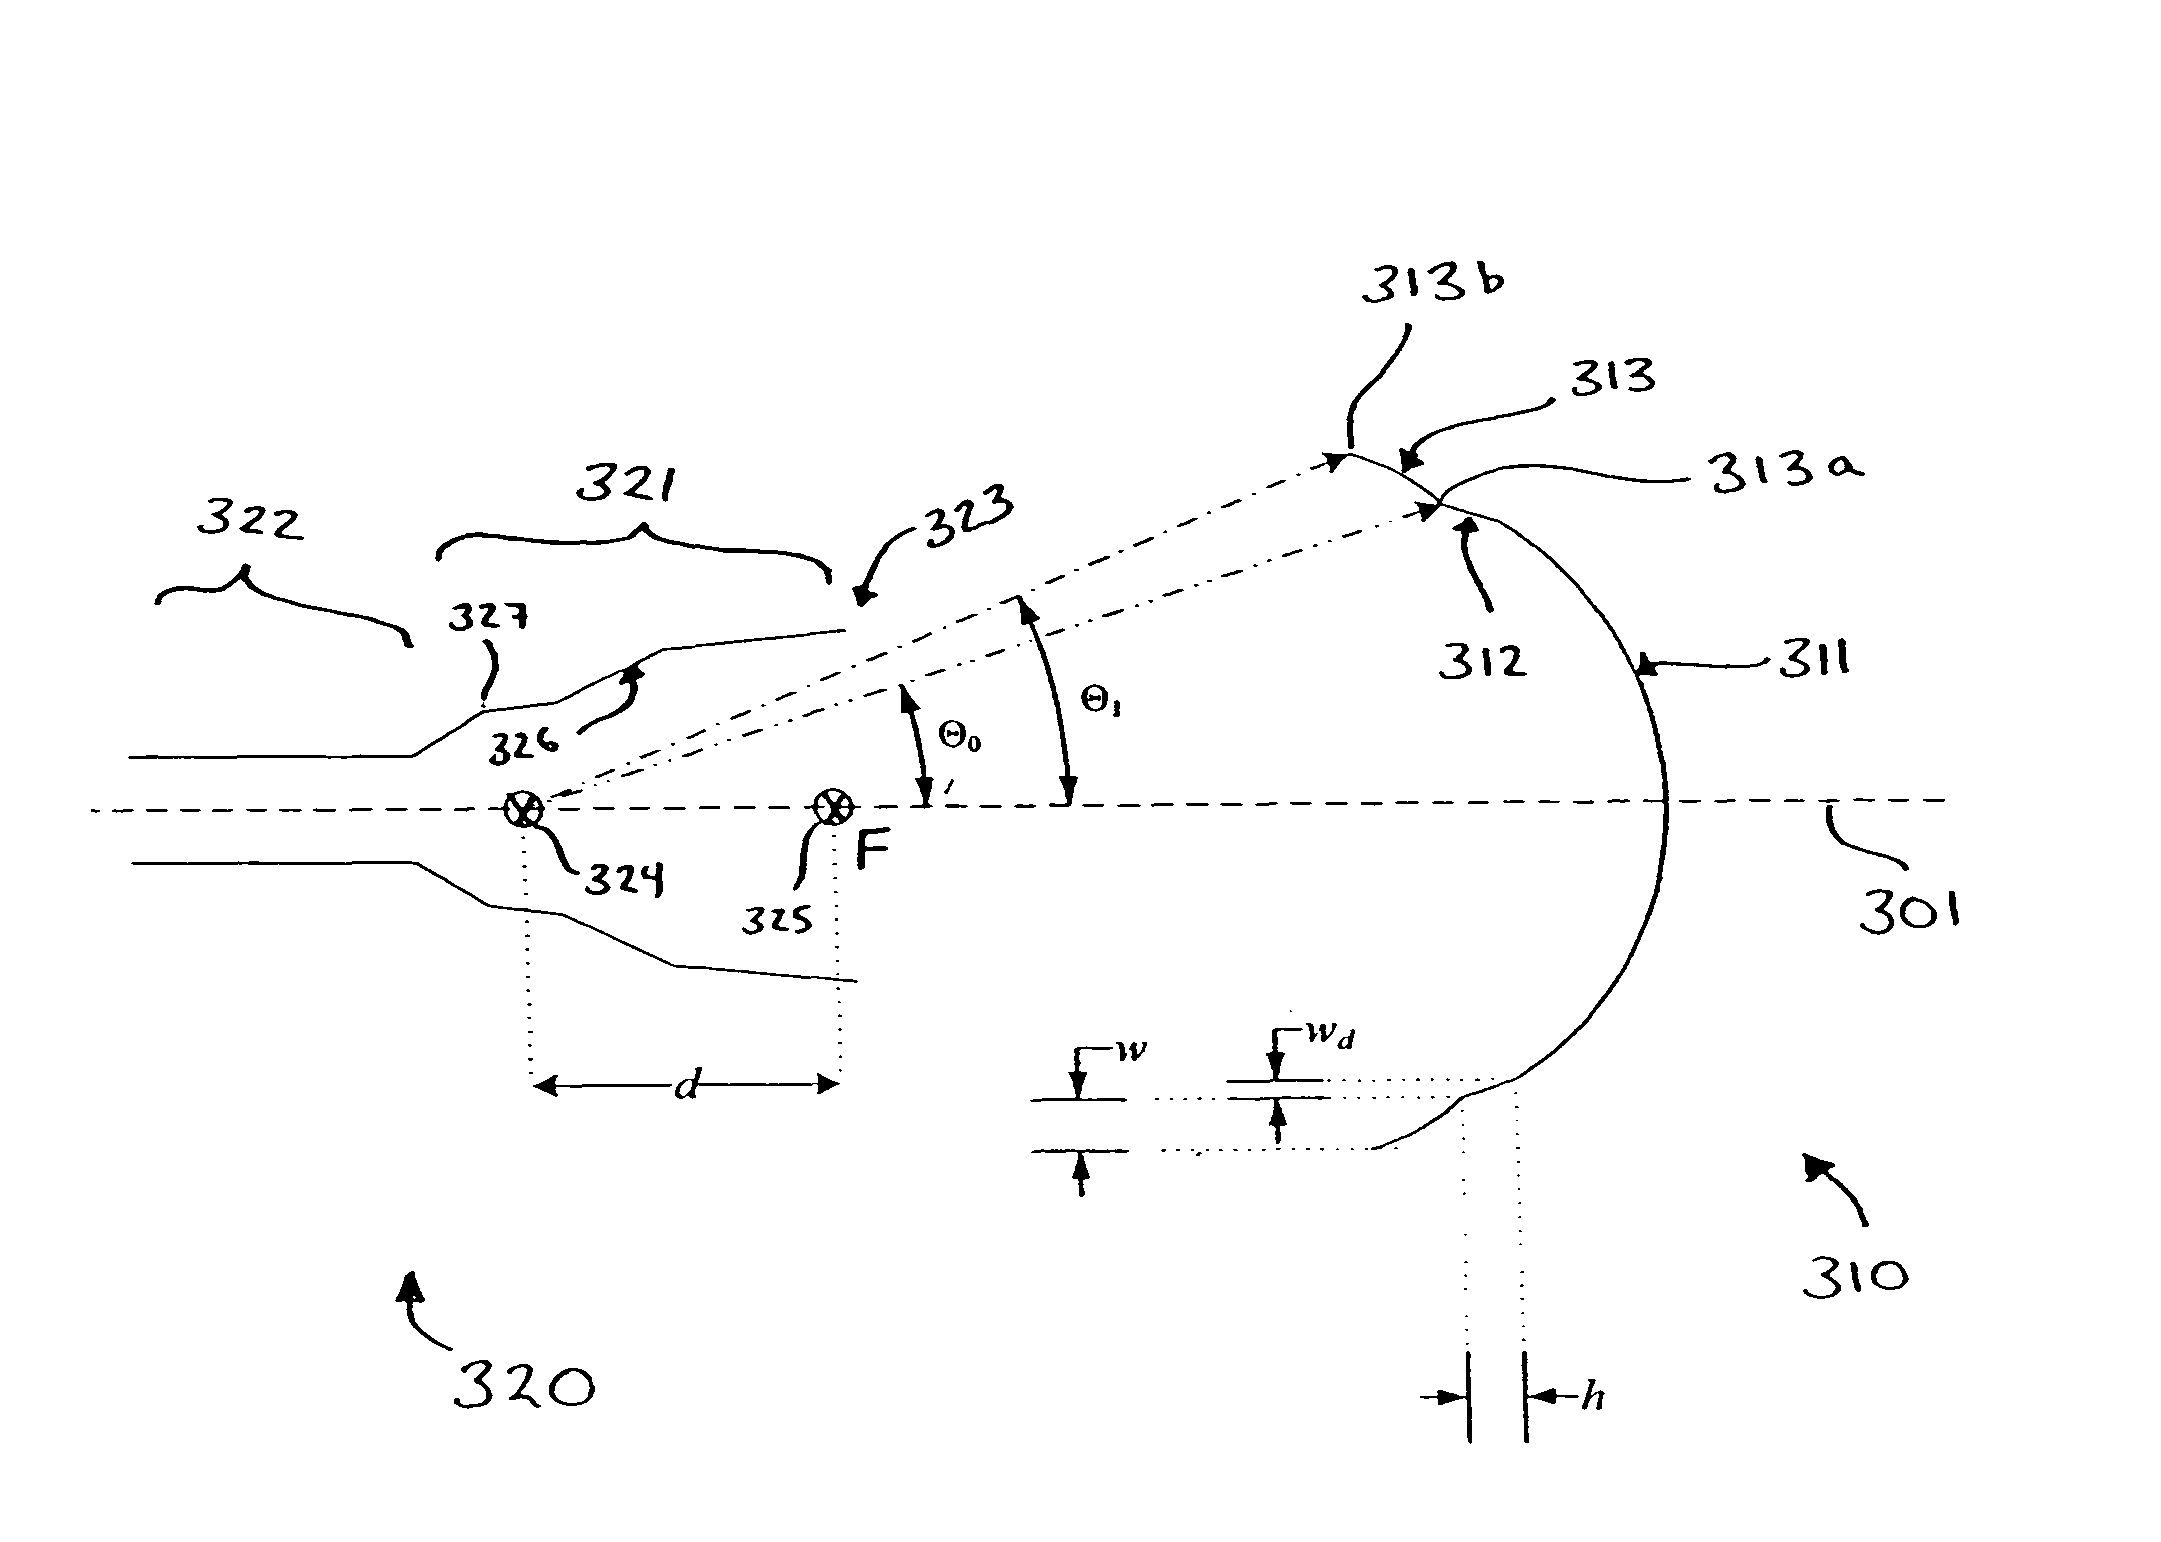 Stepped-reflector antenna for satellite communication payloads